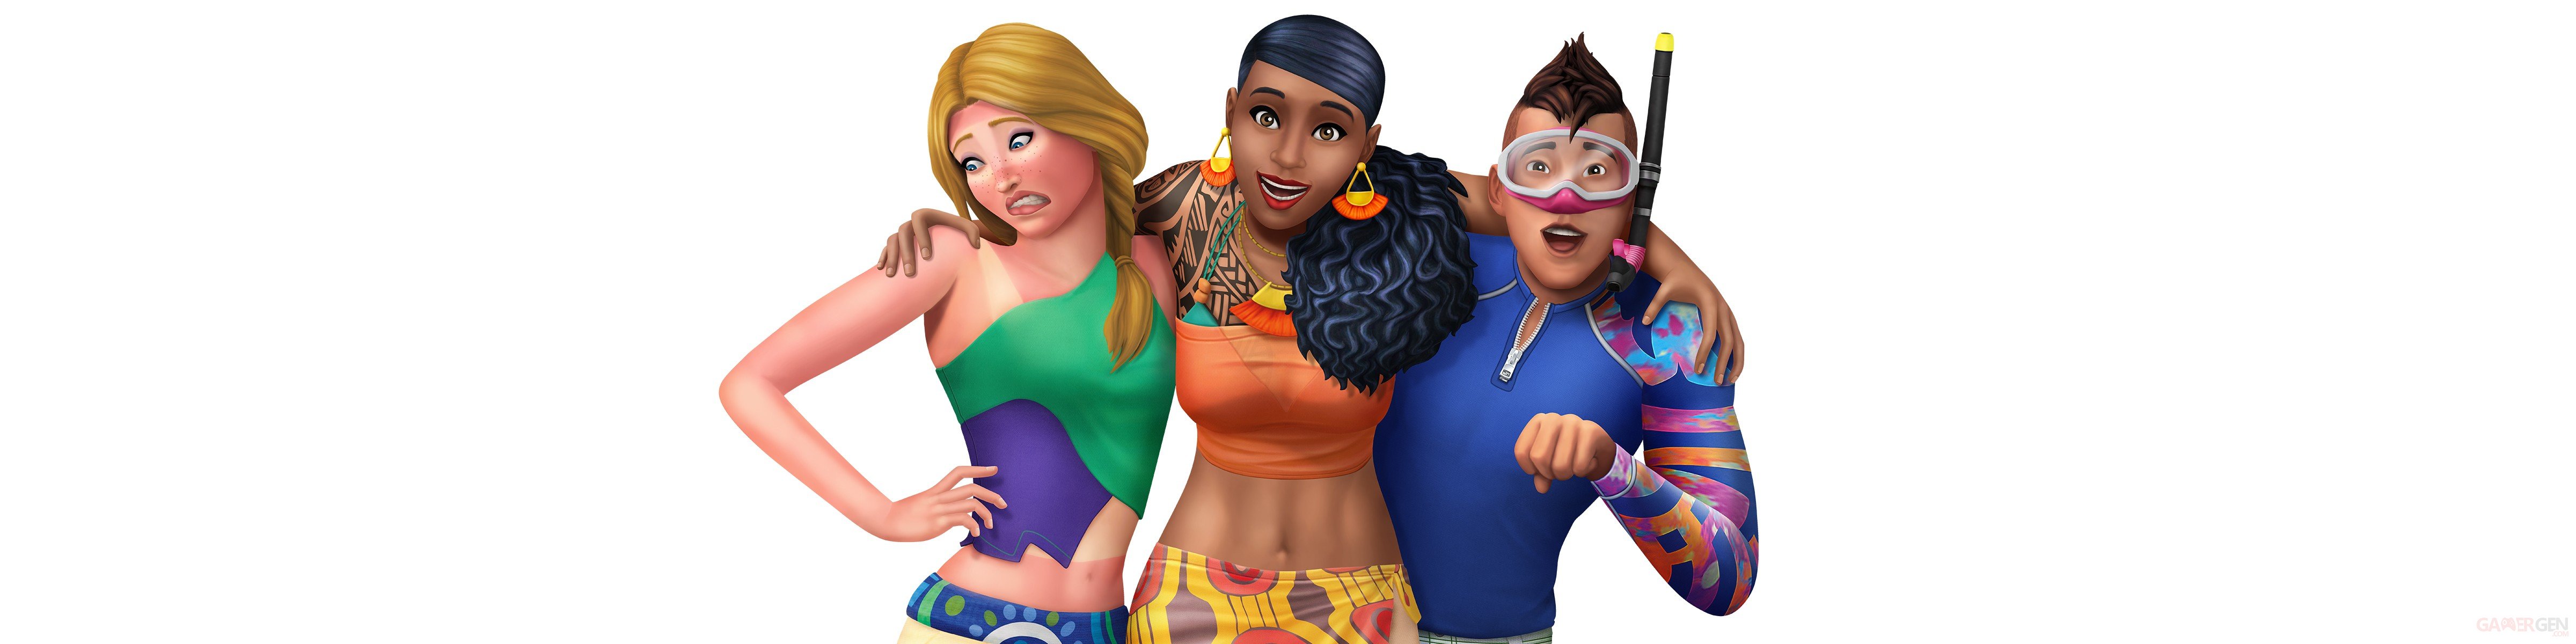 sims 4 all dlc free download including island living